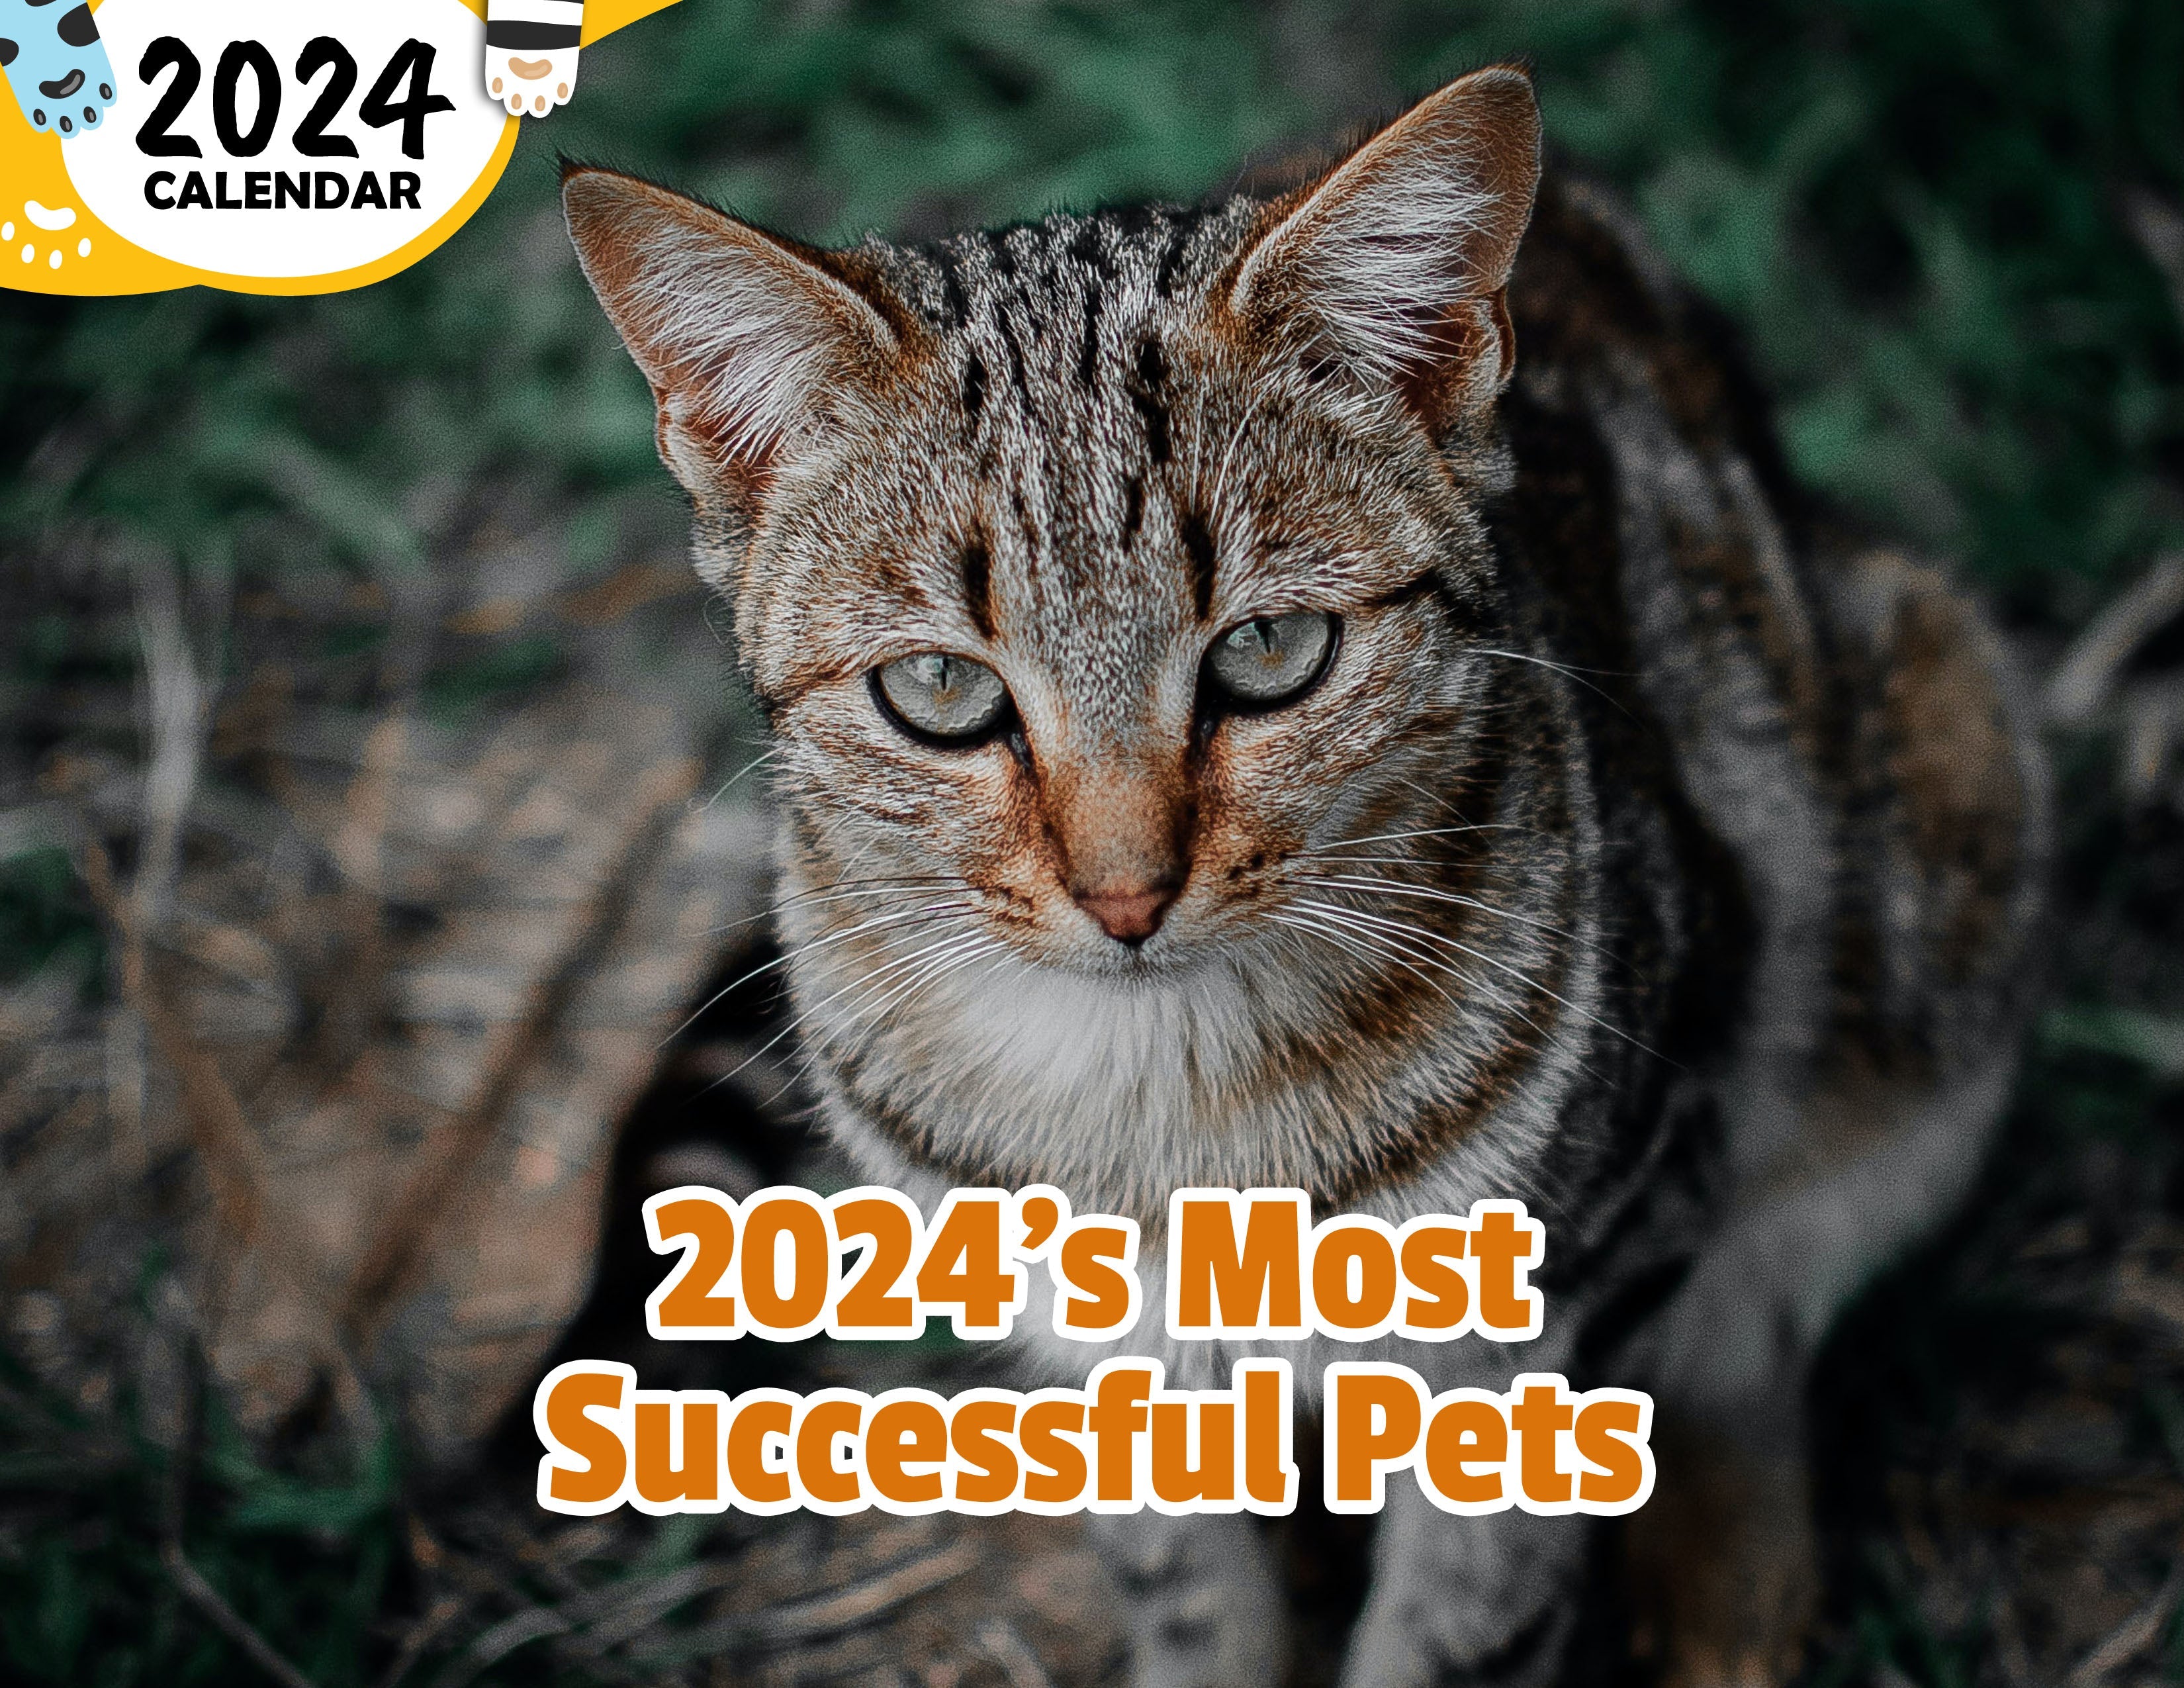 2024's Most Successful Pets 2024 Wall Calendar (Published) Praise My